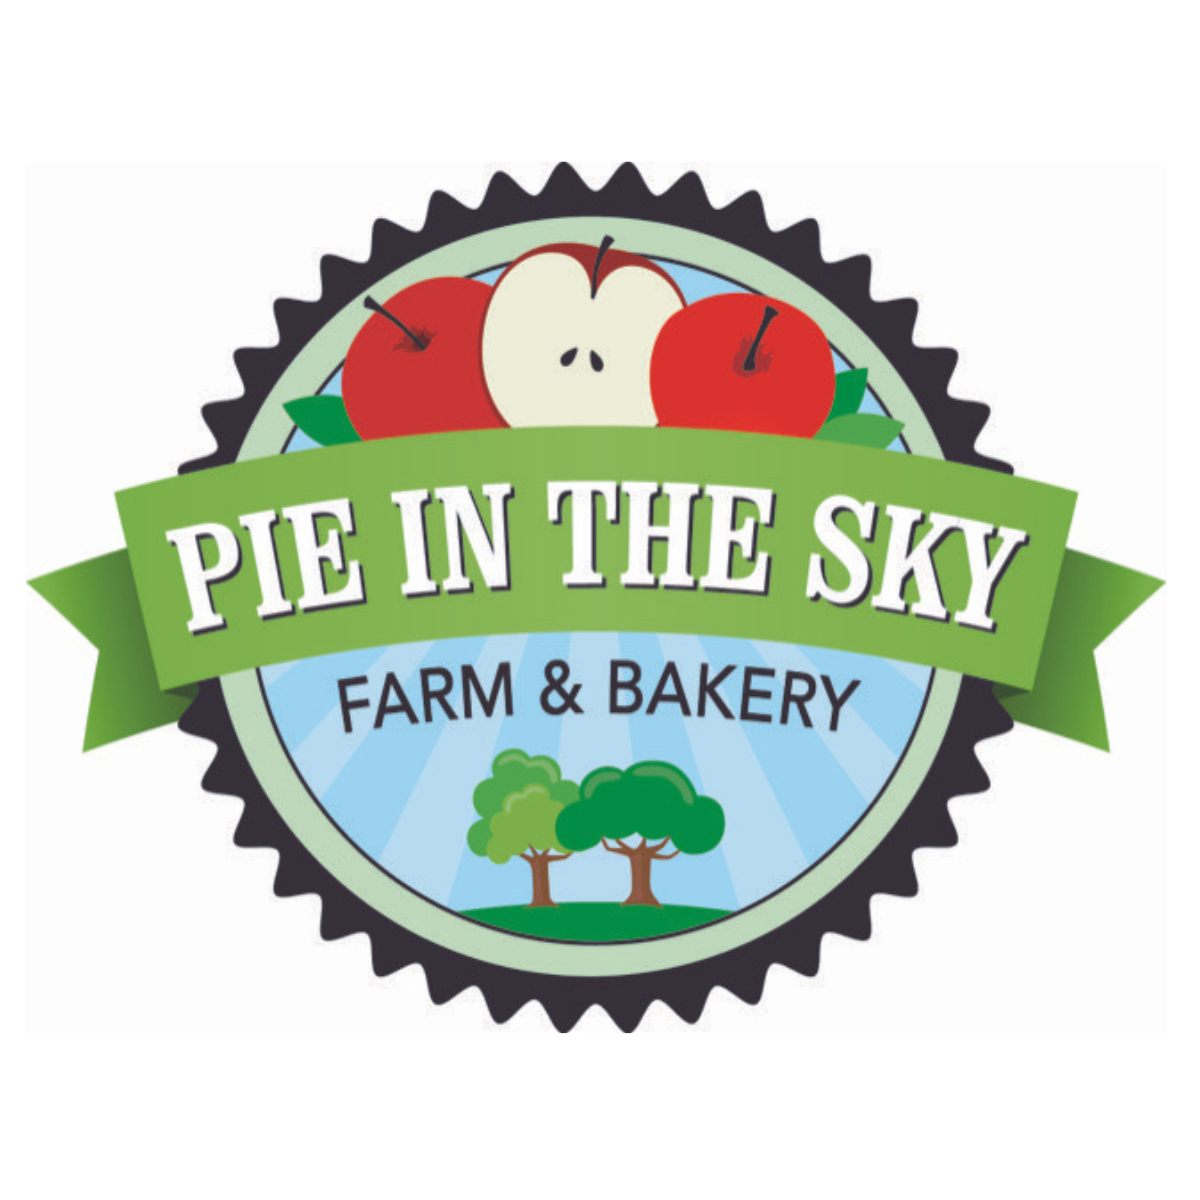 Pie in the sky farm and bakery